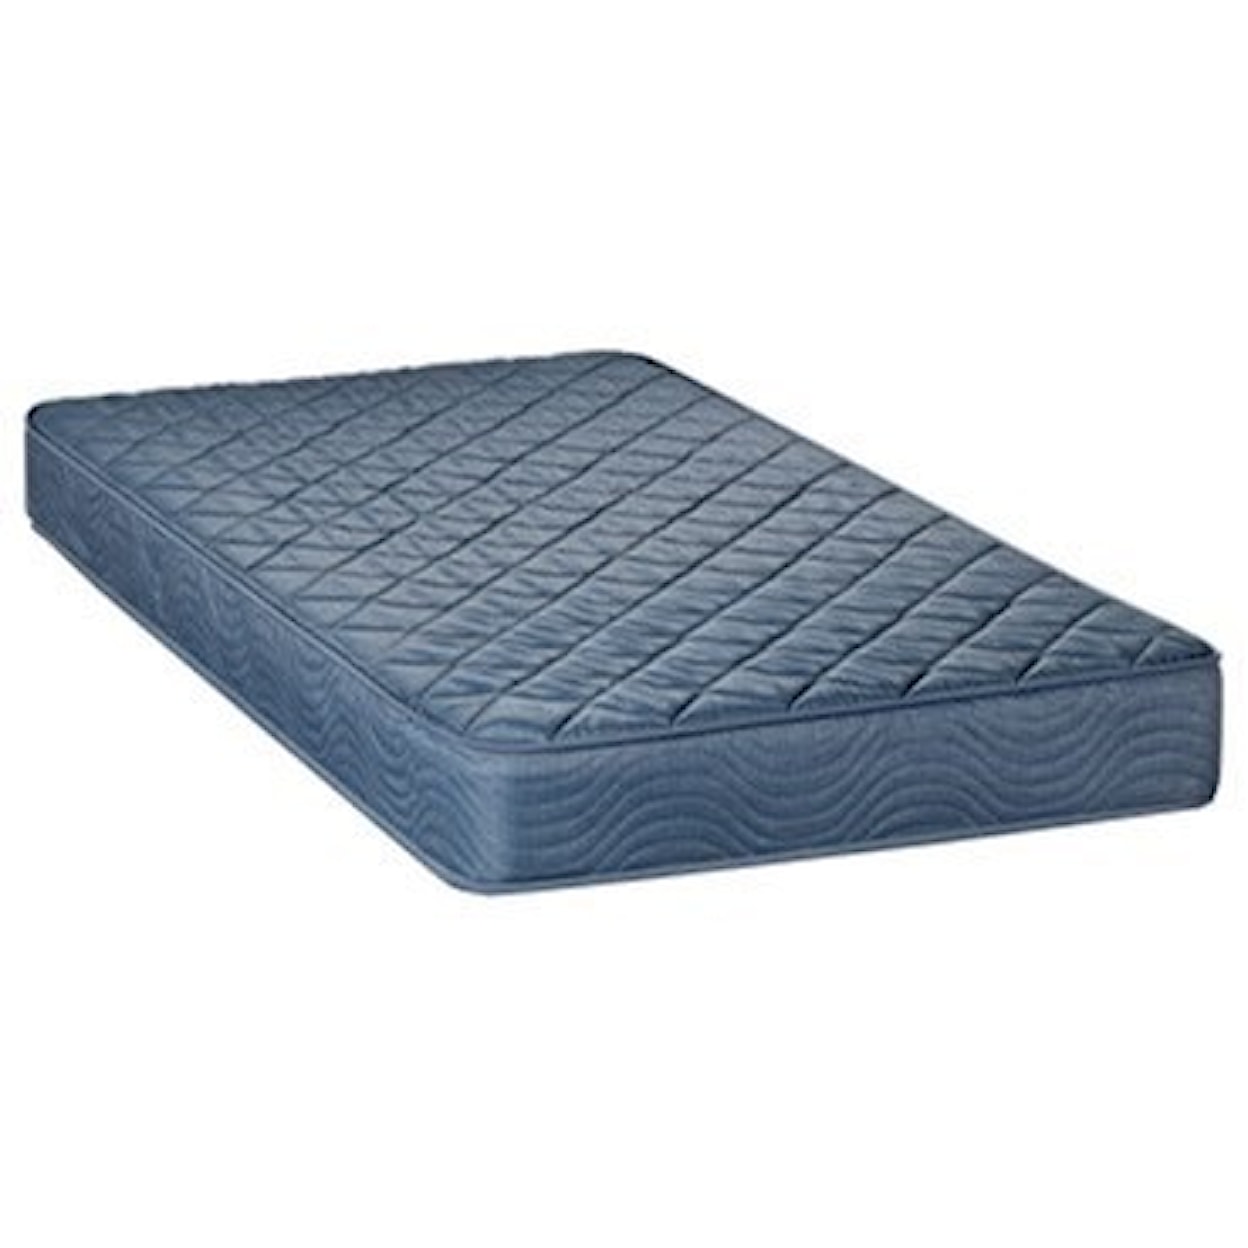 Restonic Charles II Cal King Pocketed Coil Mattress